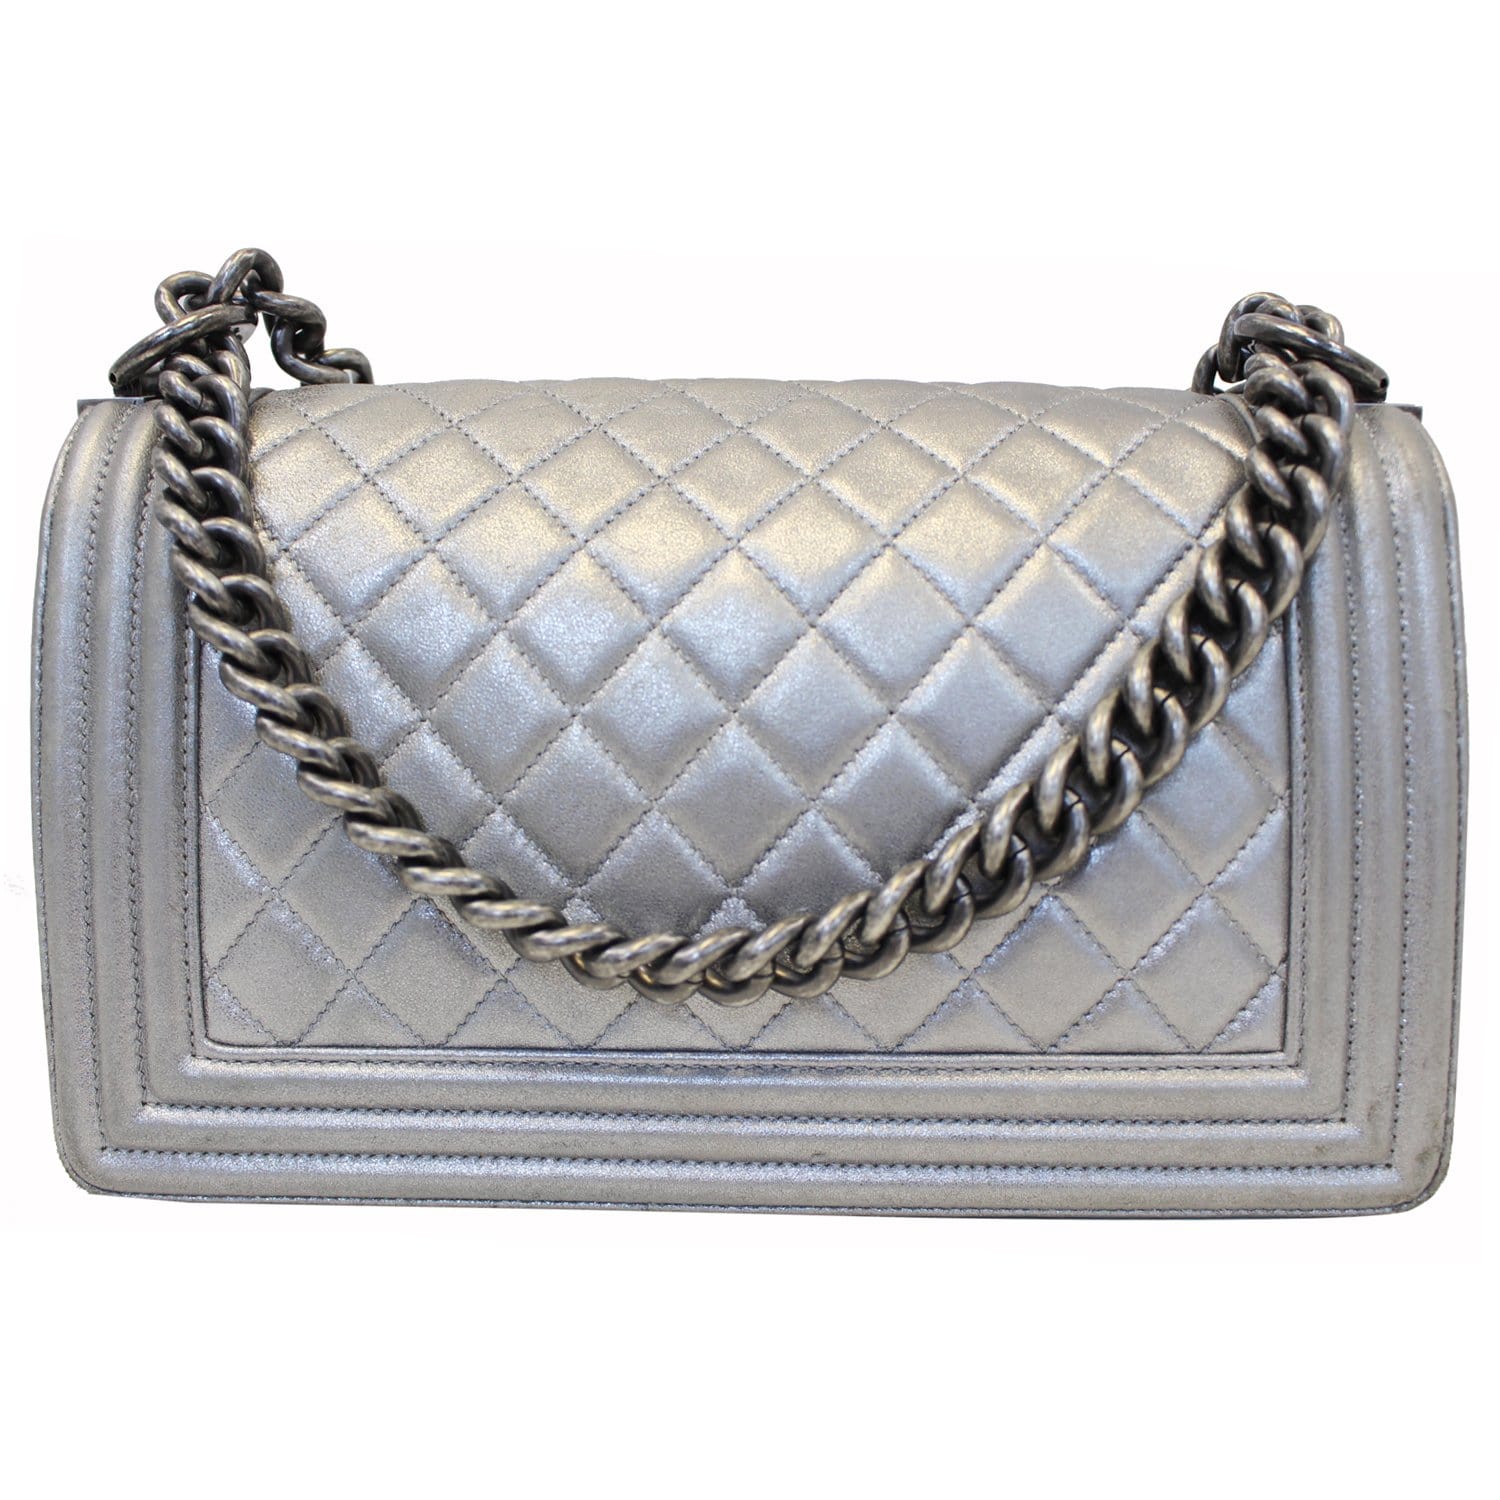 CHANEL Medium Boy White Flap Caviar Quilted Bag (Limited Edition